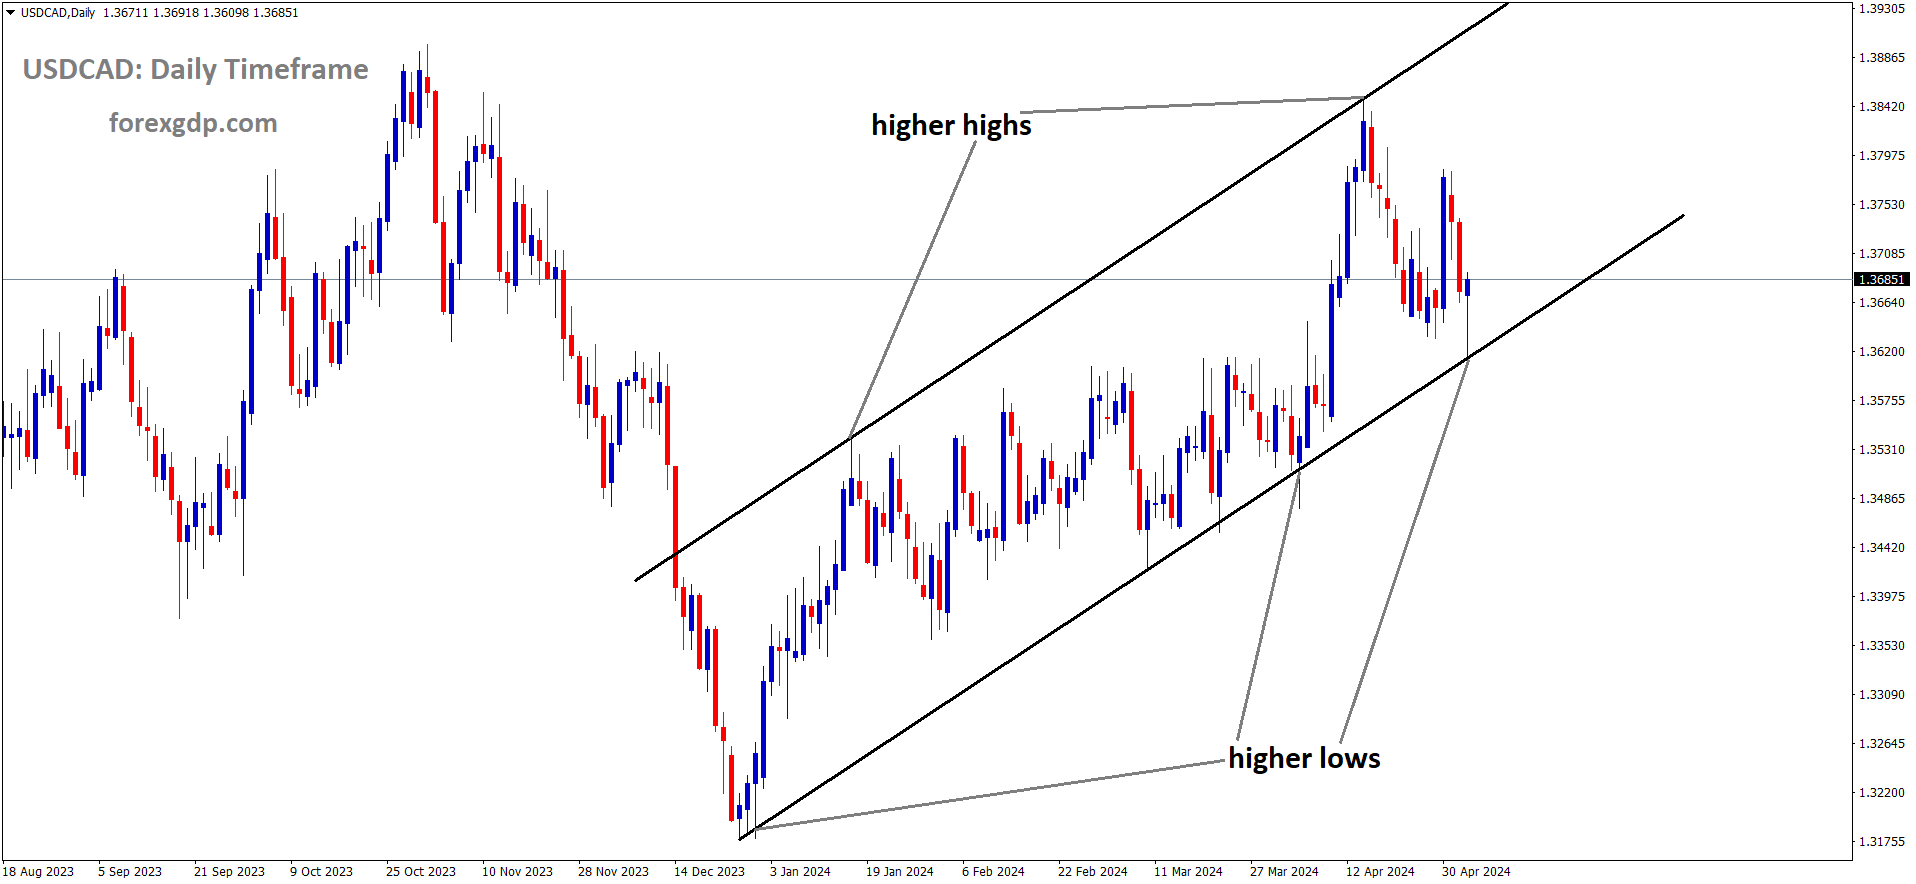 USDCAD is moving in Ascending channel and market has reached higher low area of the channel